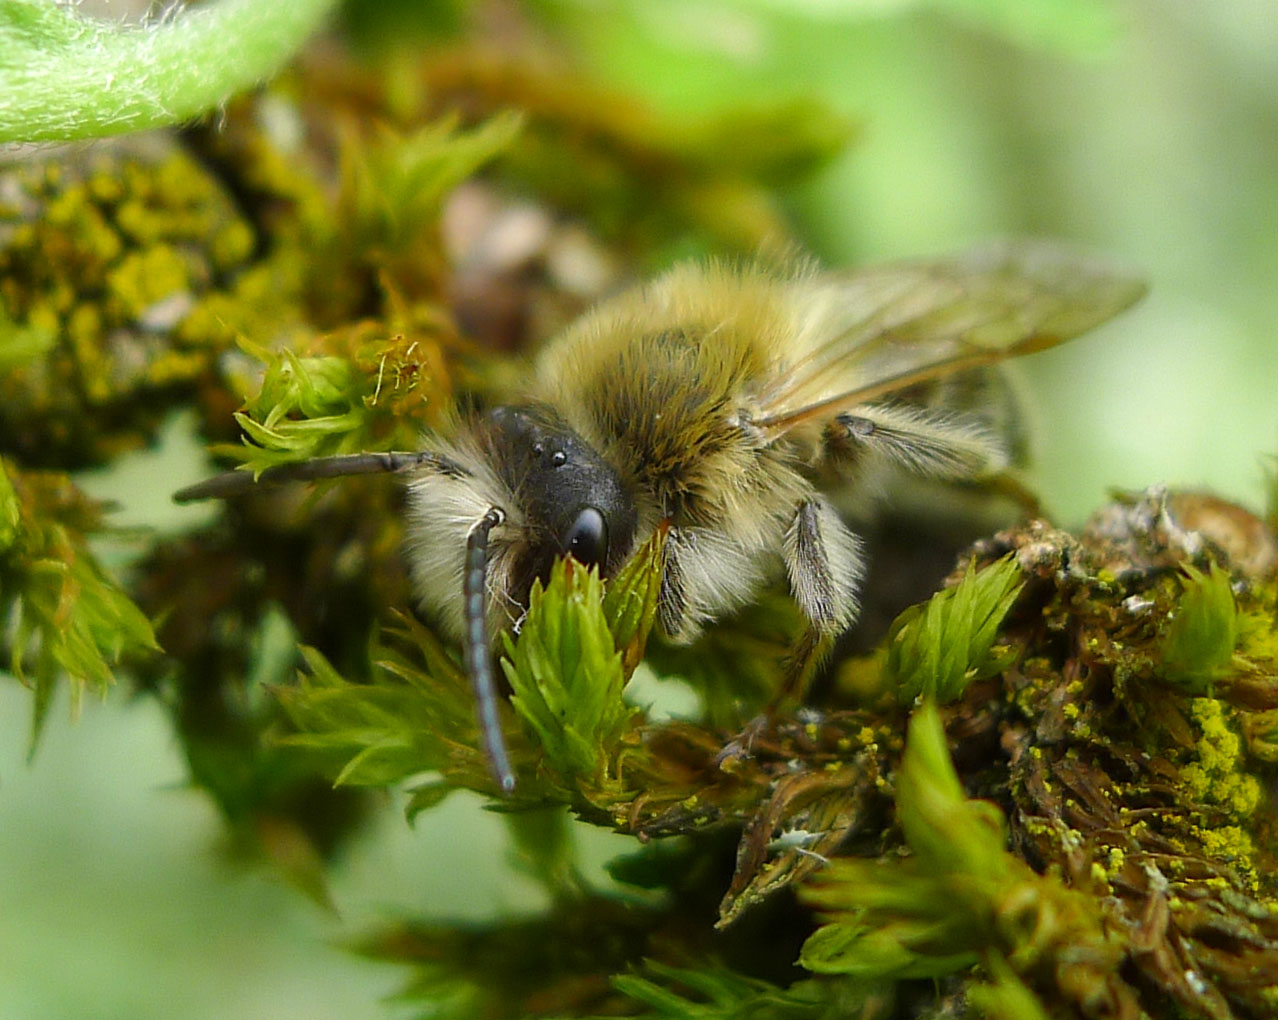 the image shows a close up of a bee resting on moss